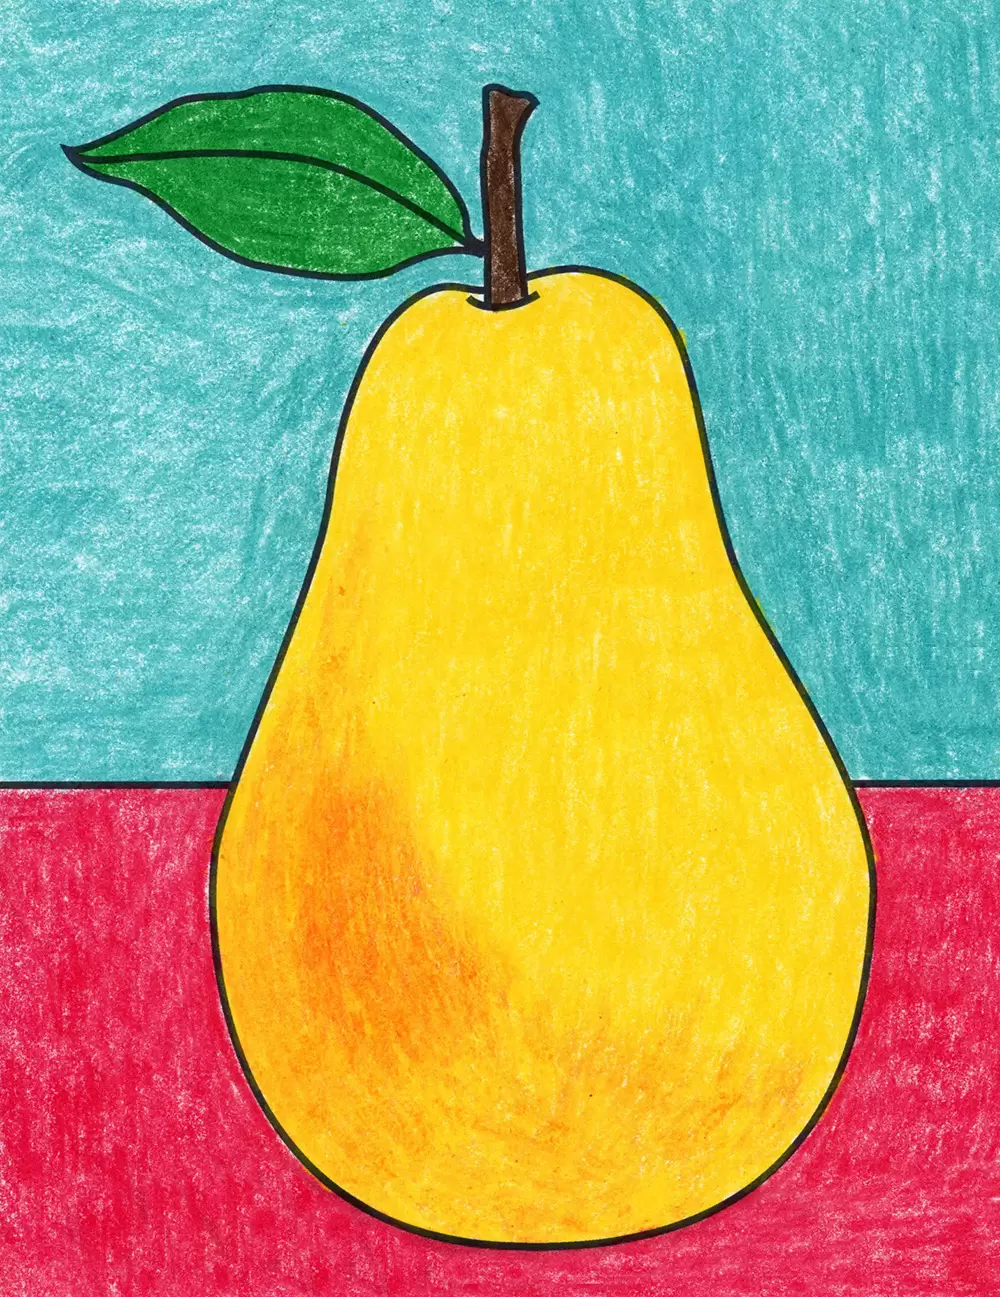 Easy How to Draw a Pear Tutorial and Pear Coloring Page